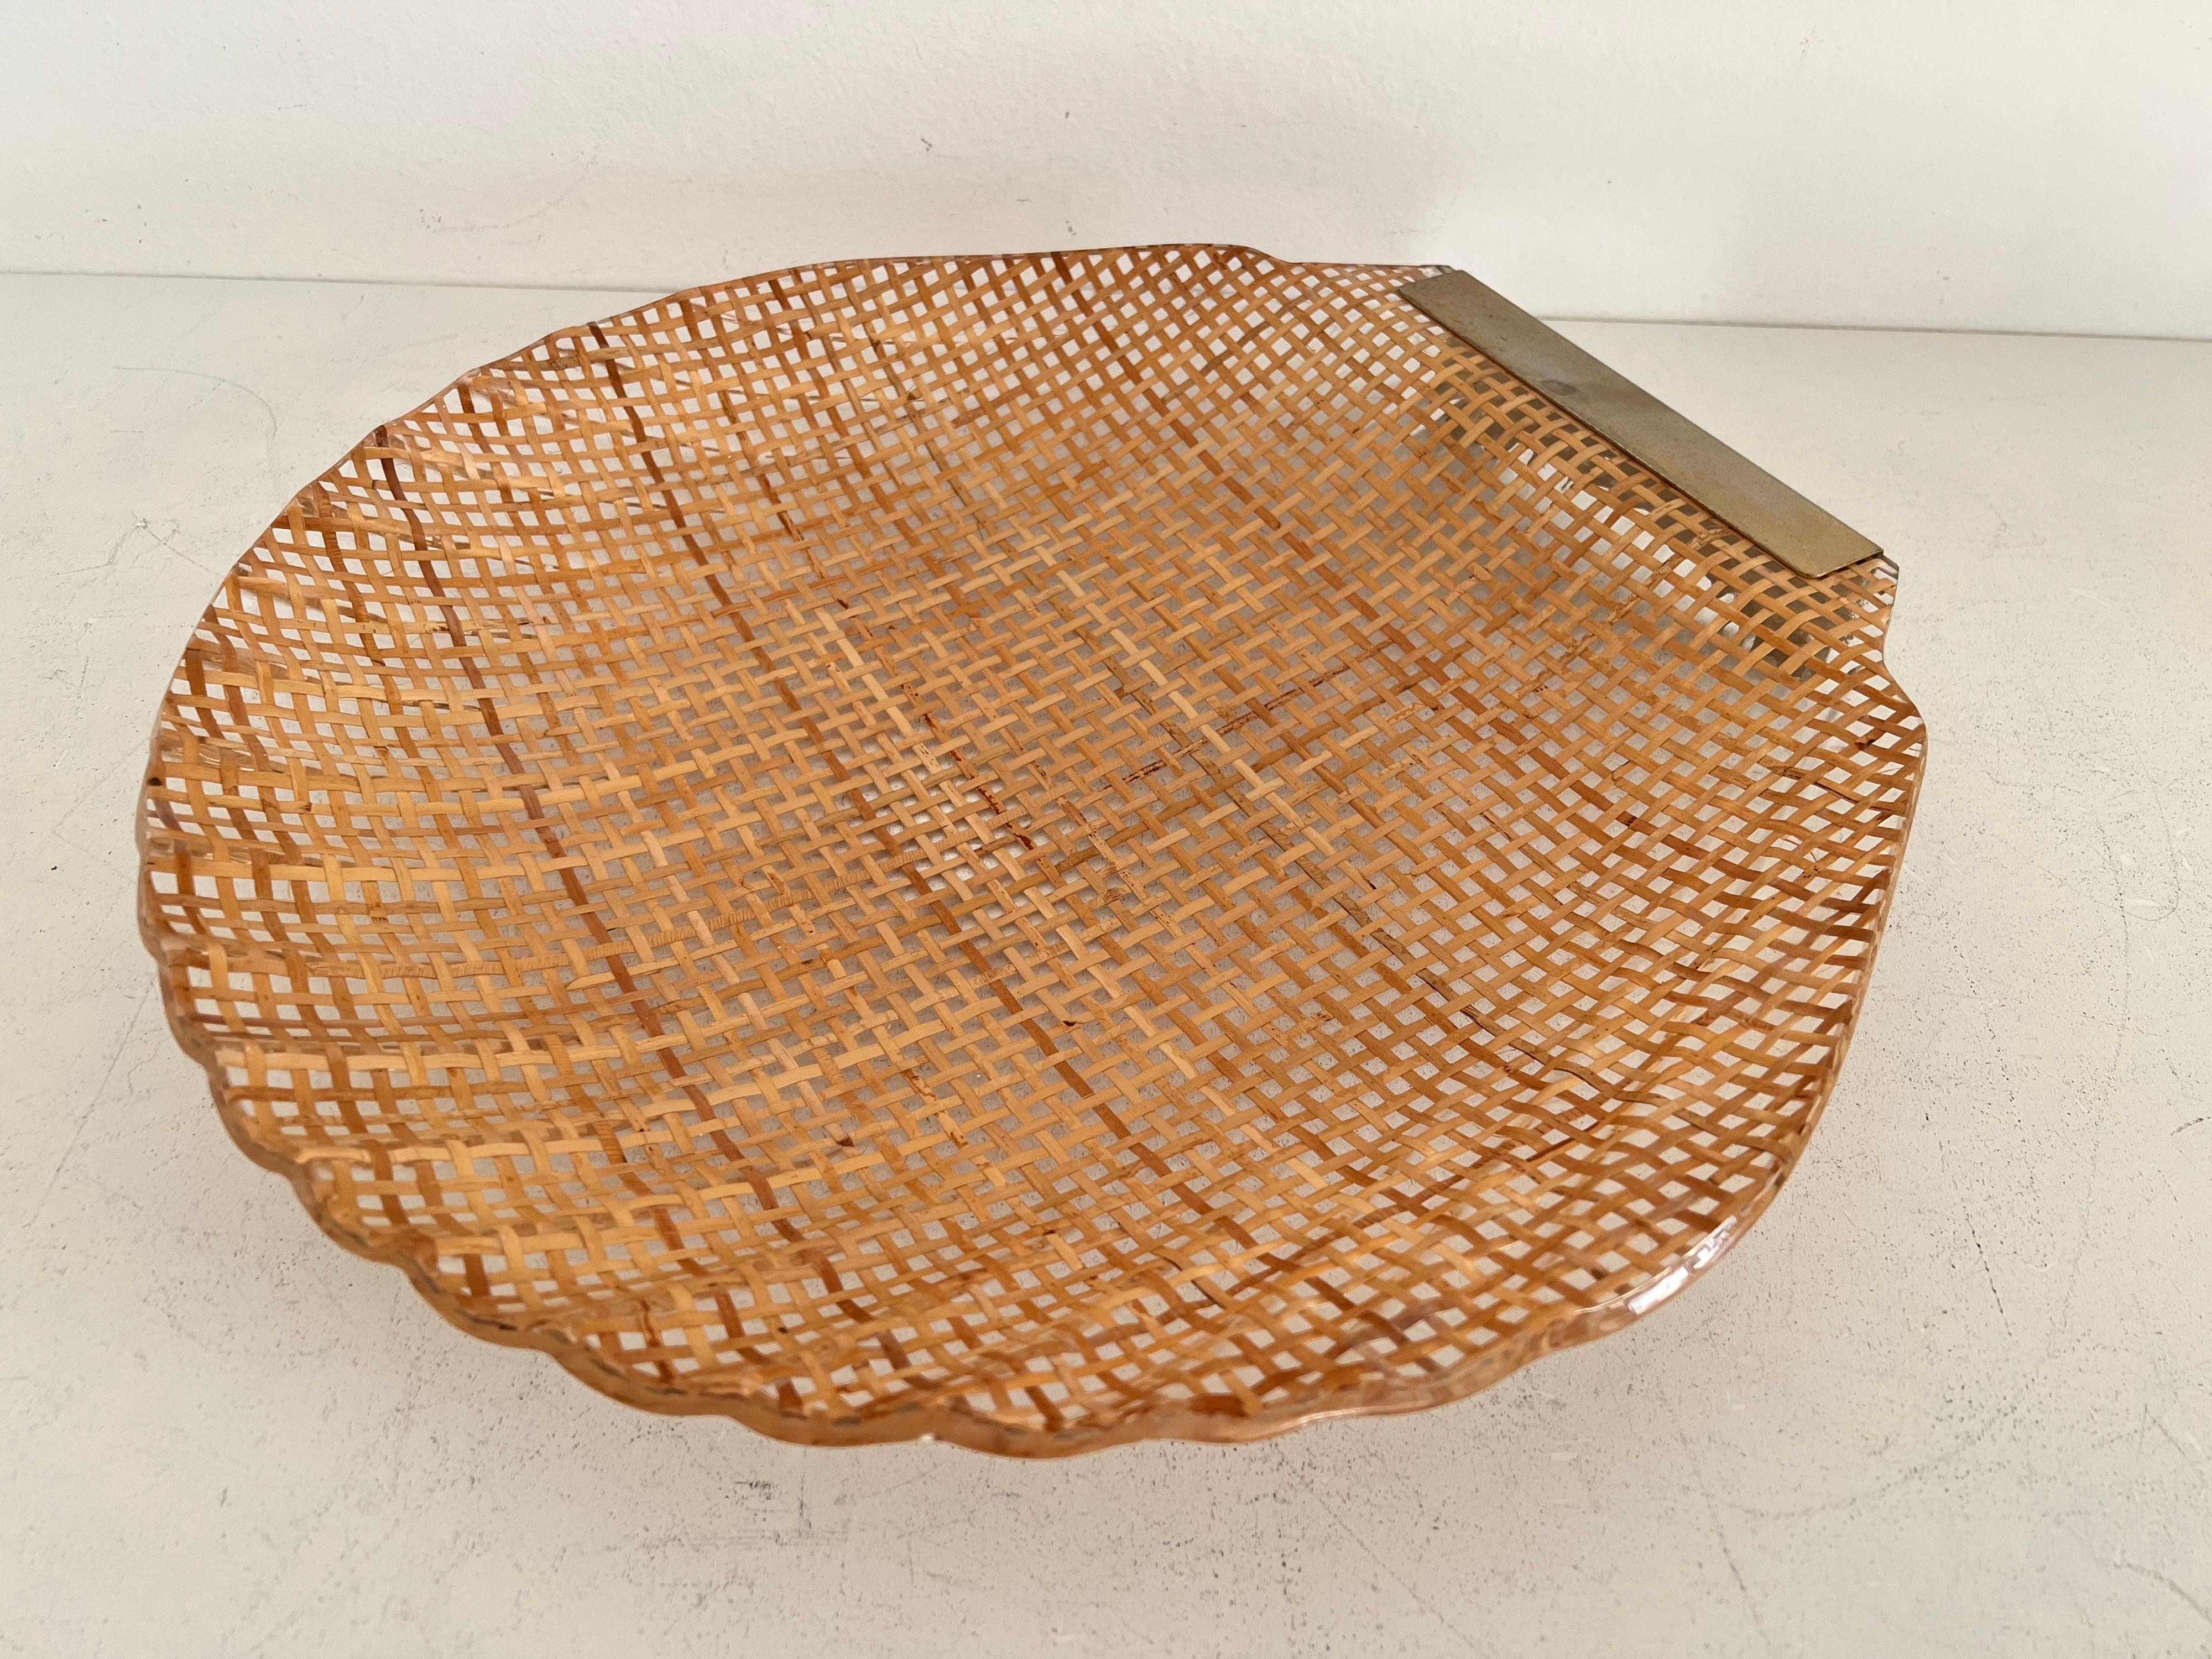 Italian MidCentury Serving Tray in Lucite, Rattan and Brass in Shell Shape, 1970 For Sale 12